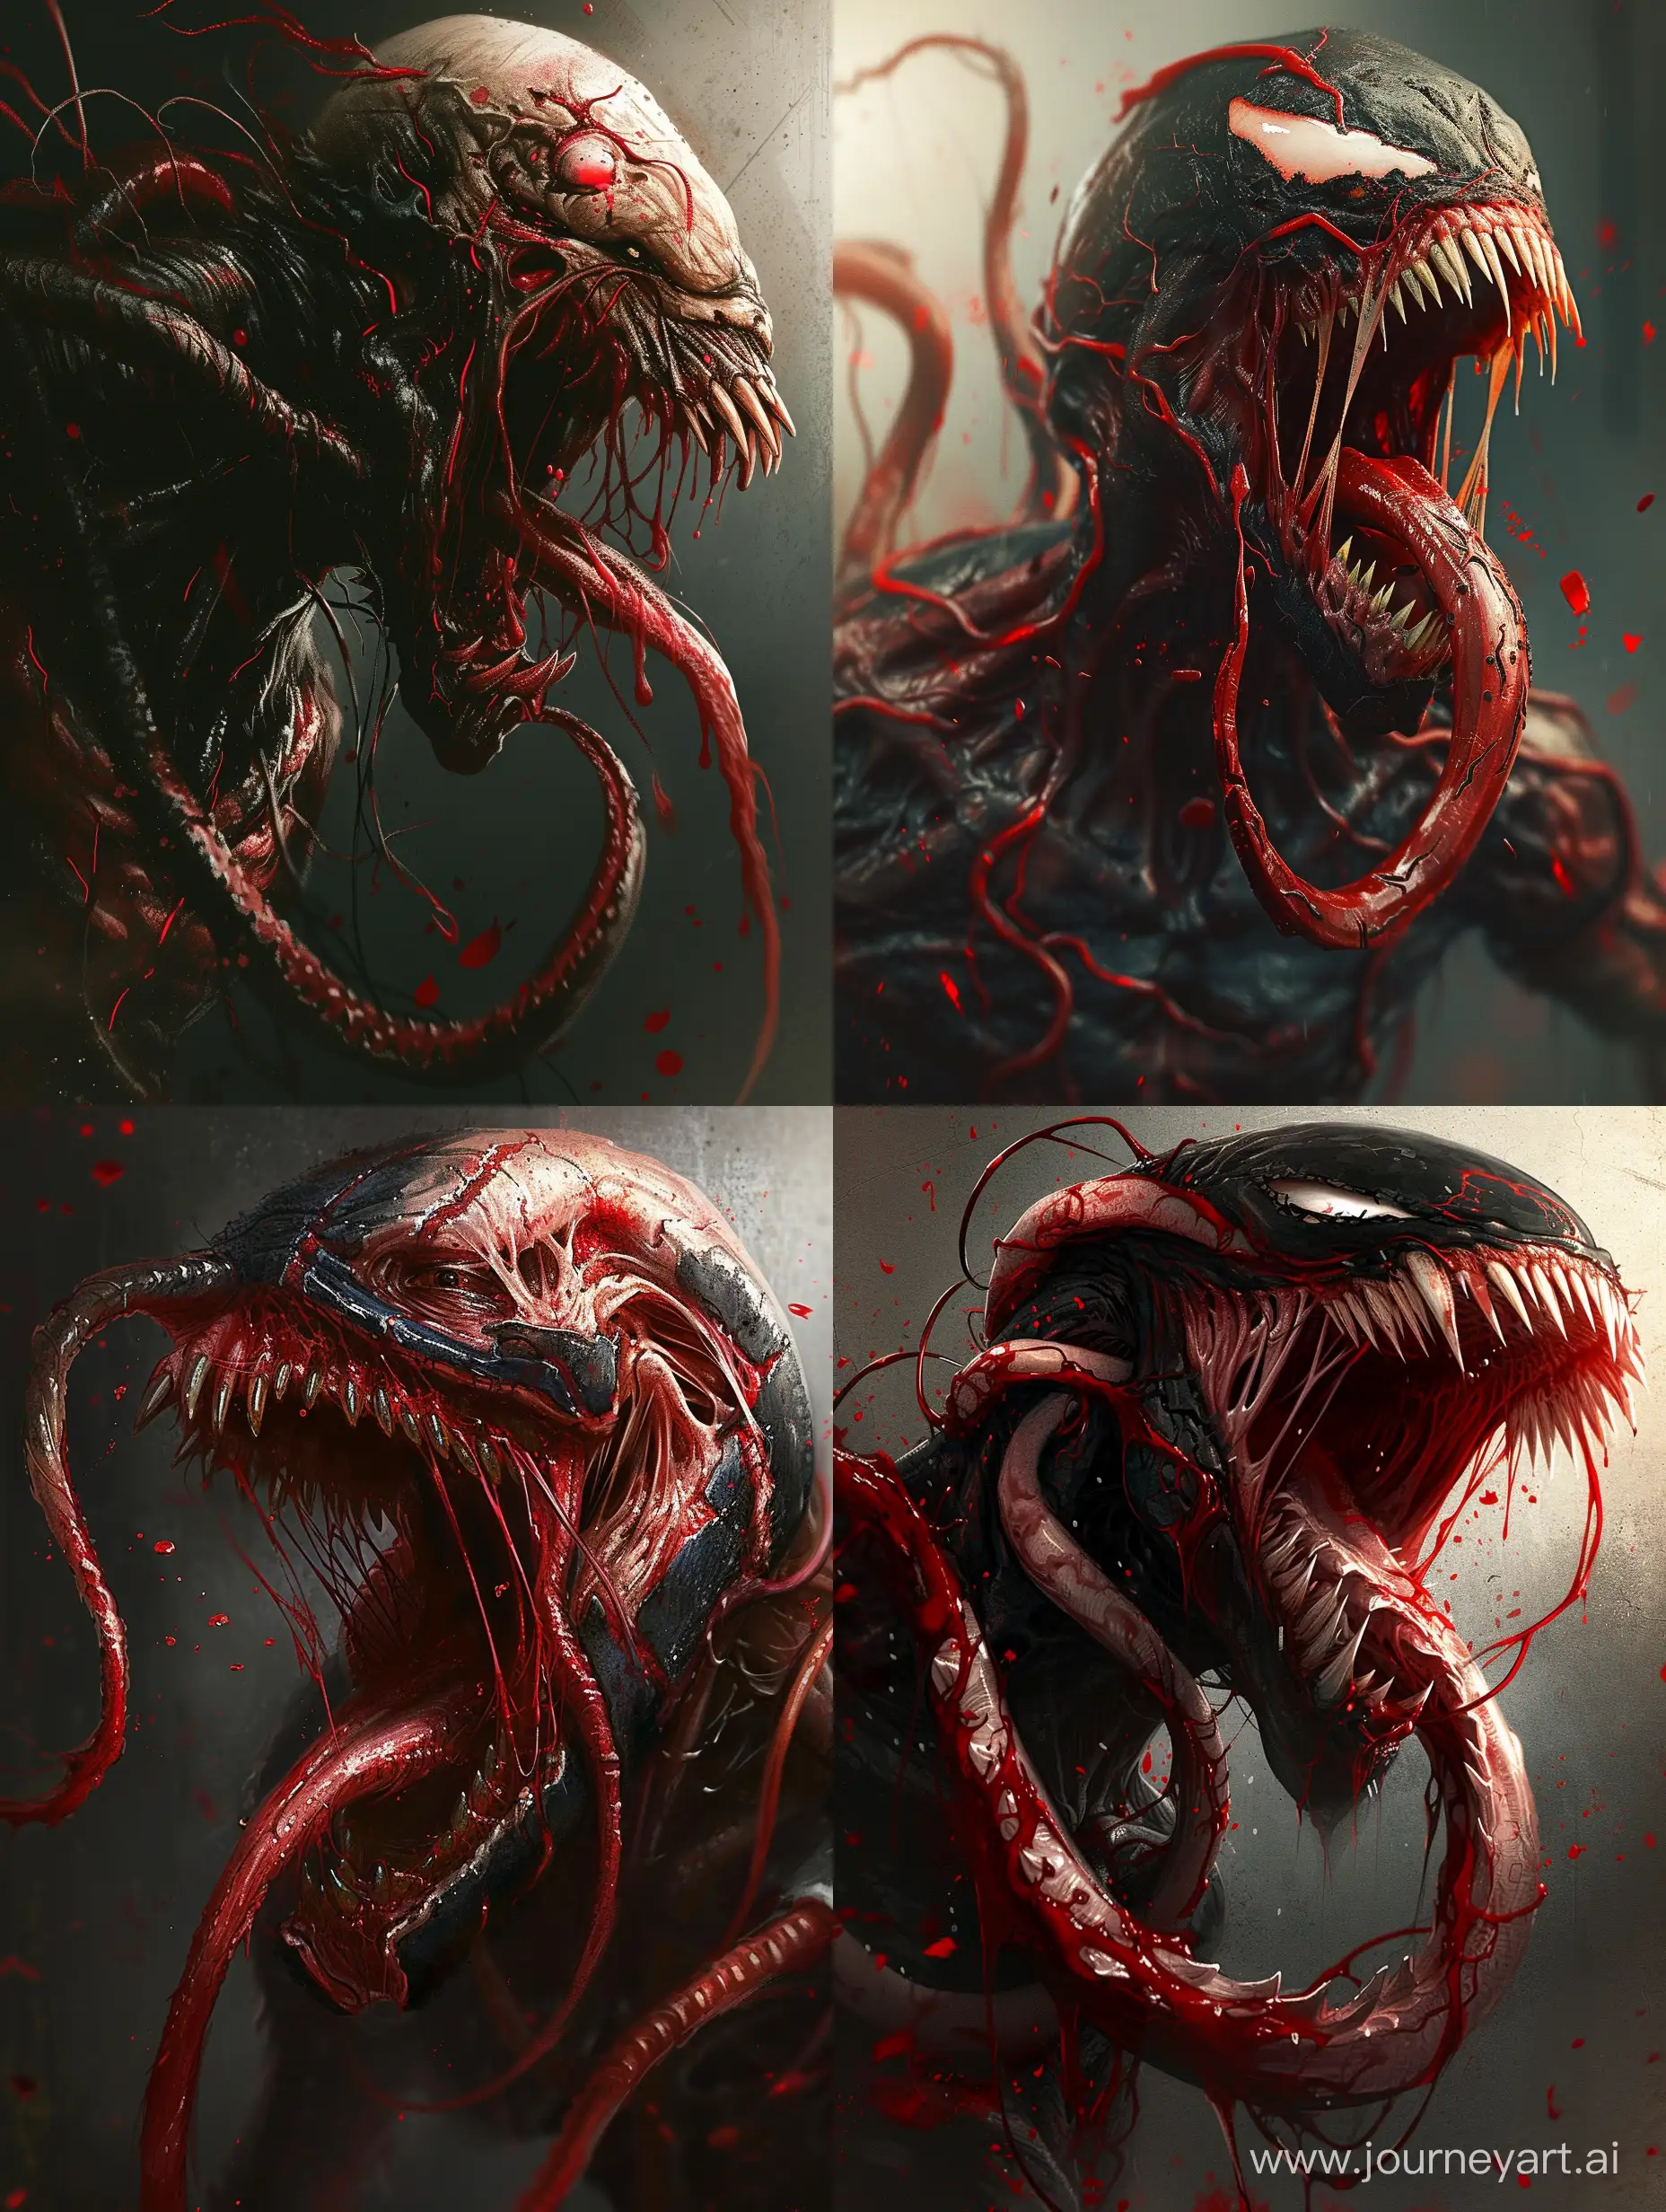 The image features a close-up of a monster with red and black skin, long teeth, and a large, elongated red tongue. It has red blood vessels scattered across its skin and is shown in a dark, muted color palette. The monster appears to be contorting its face in a menacing manner.